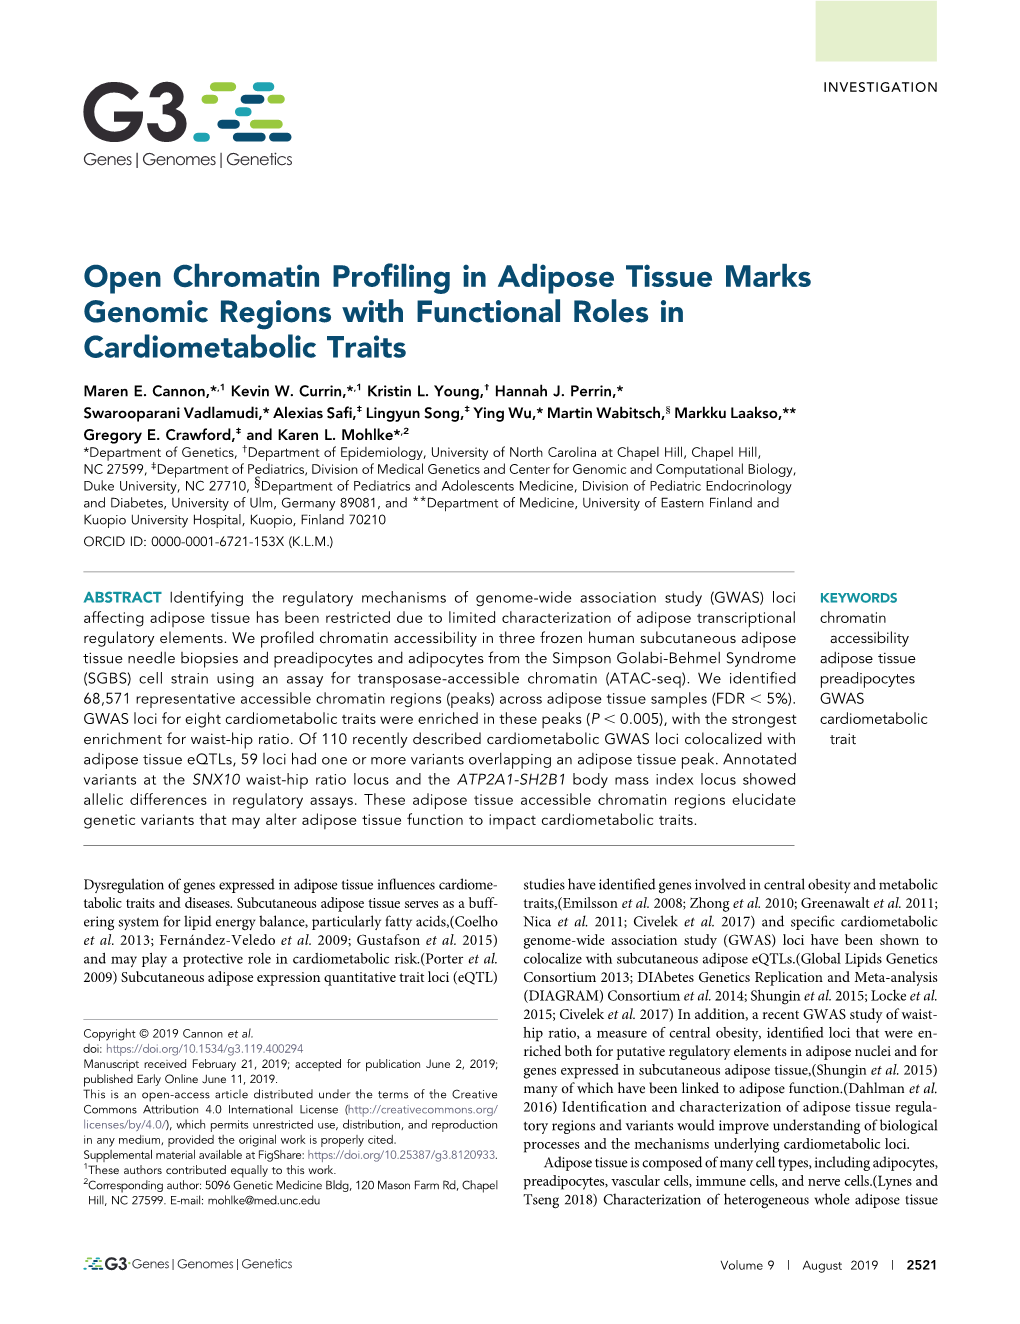 Open Chromatin Profiling in Adipose Tissue Marks Genomic Regions with Functional Roles in Cardiometabolic Traits